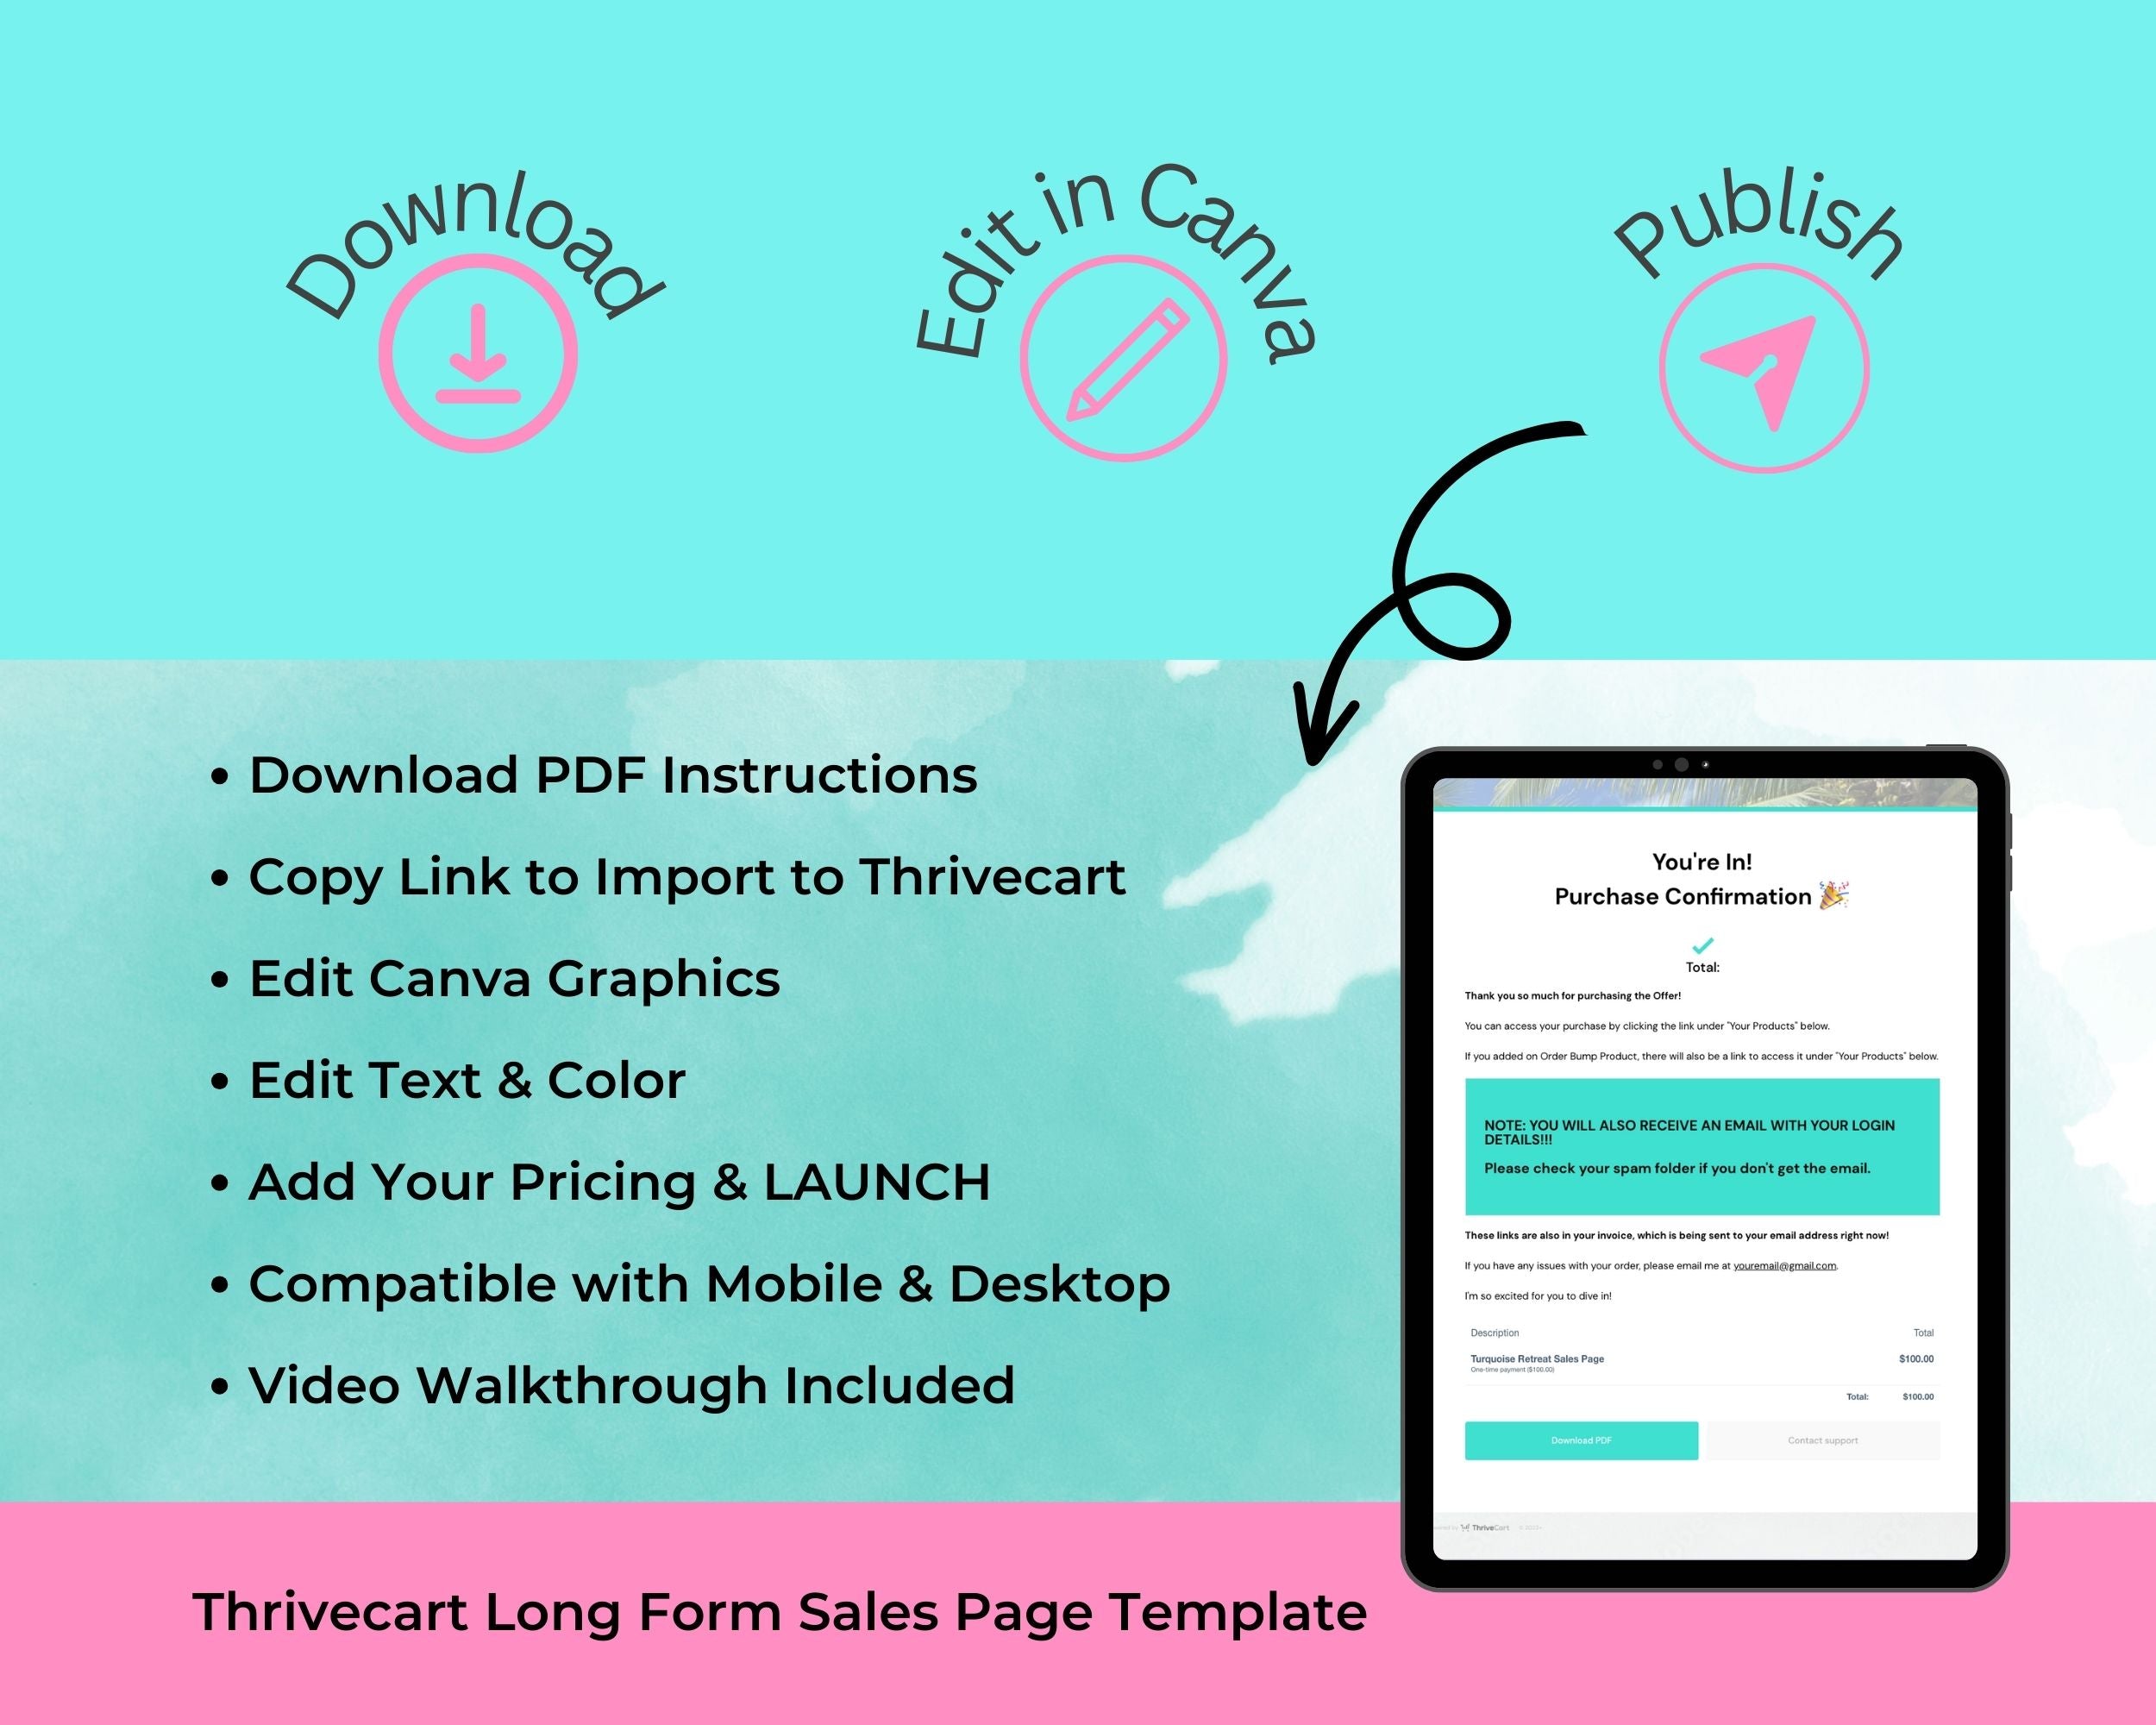 Retreat Sales Page Template in ThriveCart